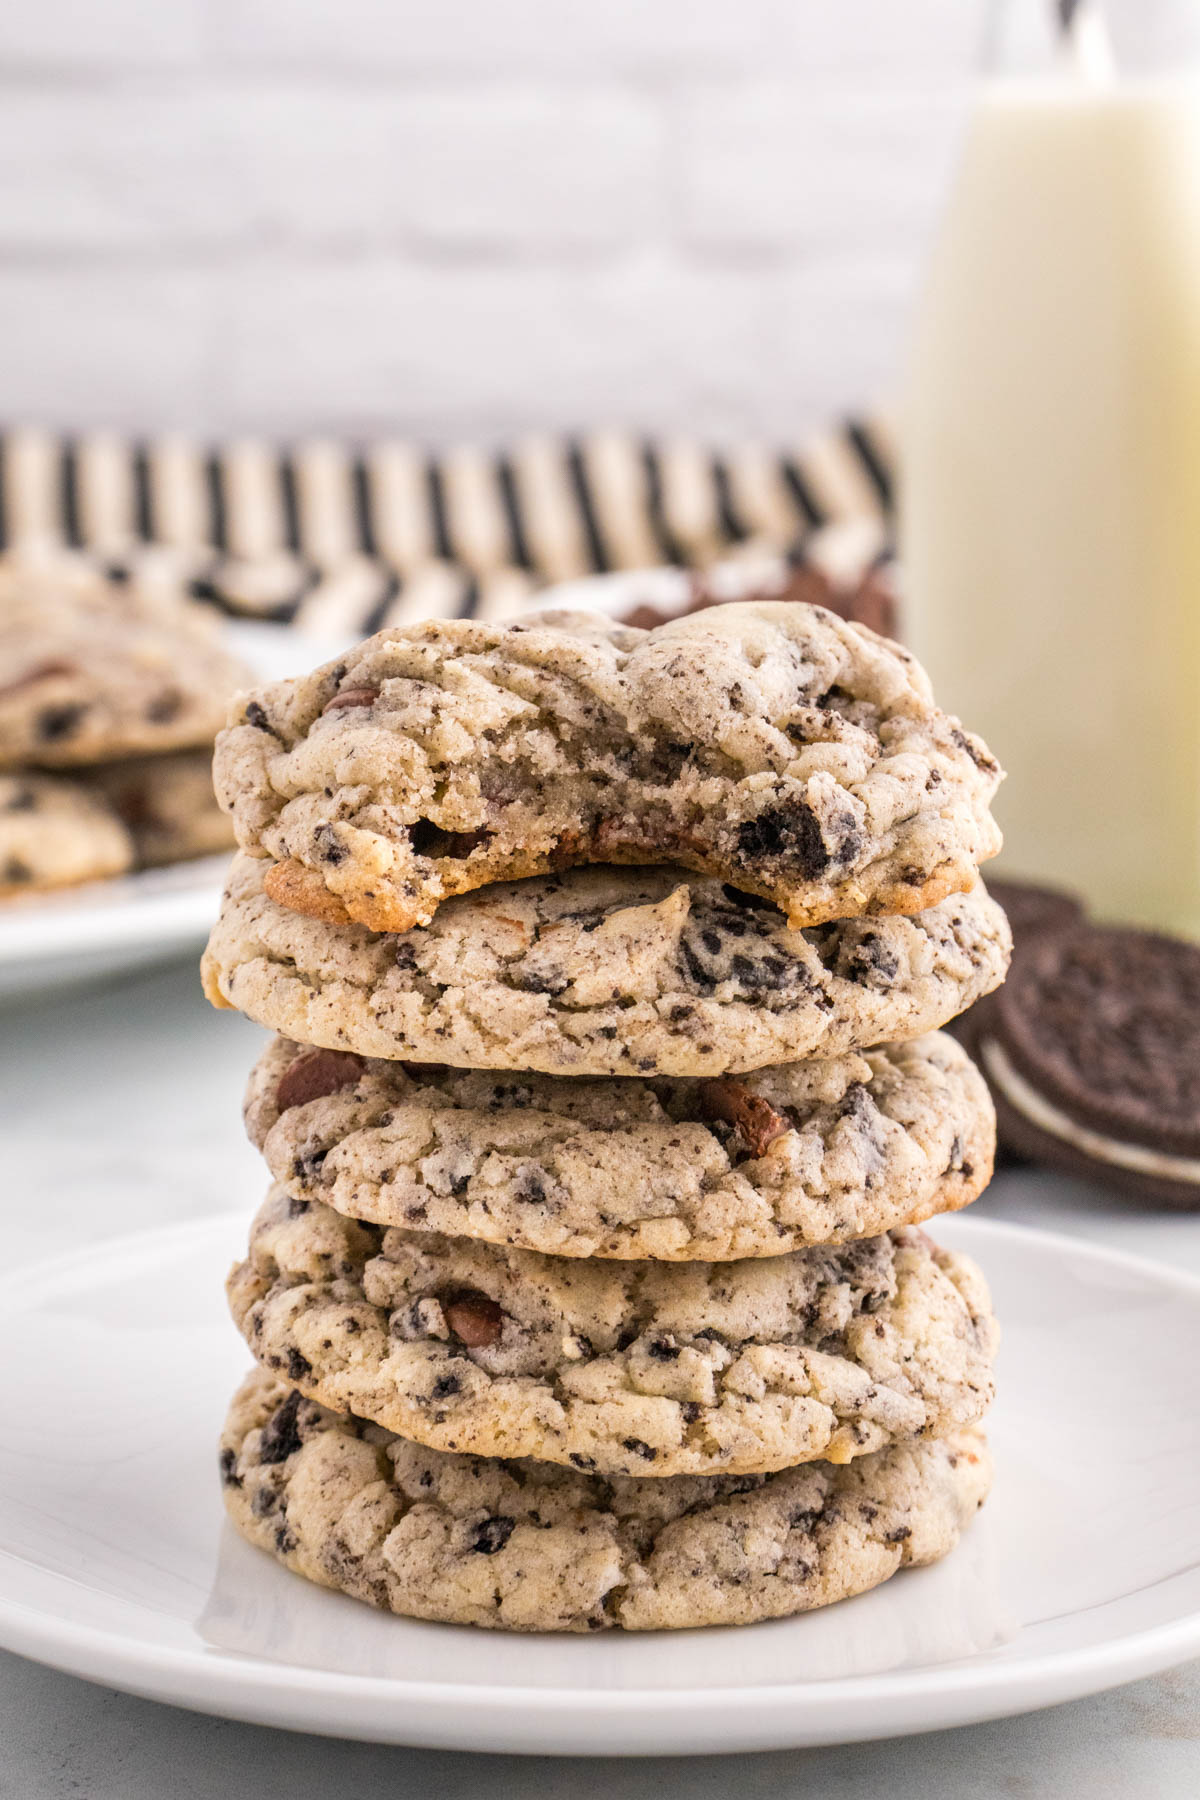 A stack of chocolate chip cookies on a white plate with a glass of milk in the background.